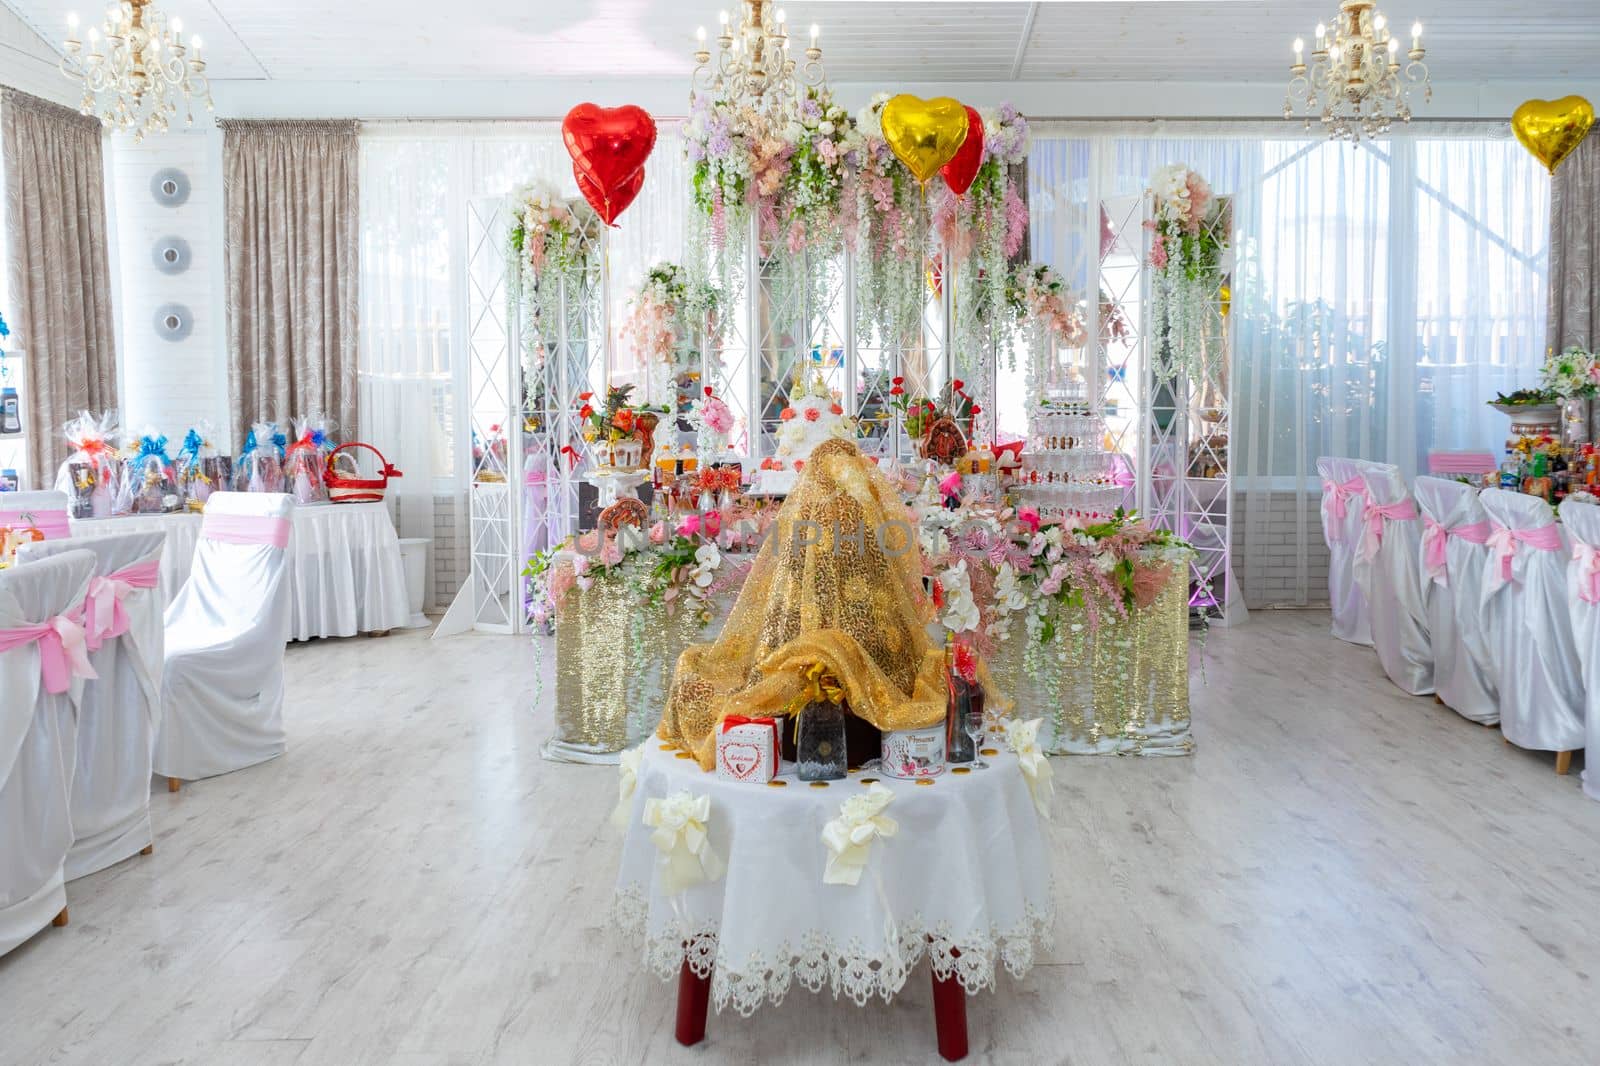 A table for ransoming the bride at a gypsy wedding. The wedding table of the bride and groom is decorated with many different flowers. Ukraine, Vinnytsia, August 10, 2021